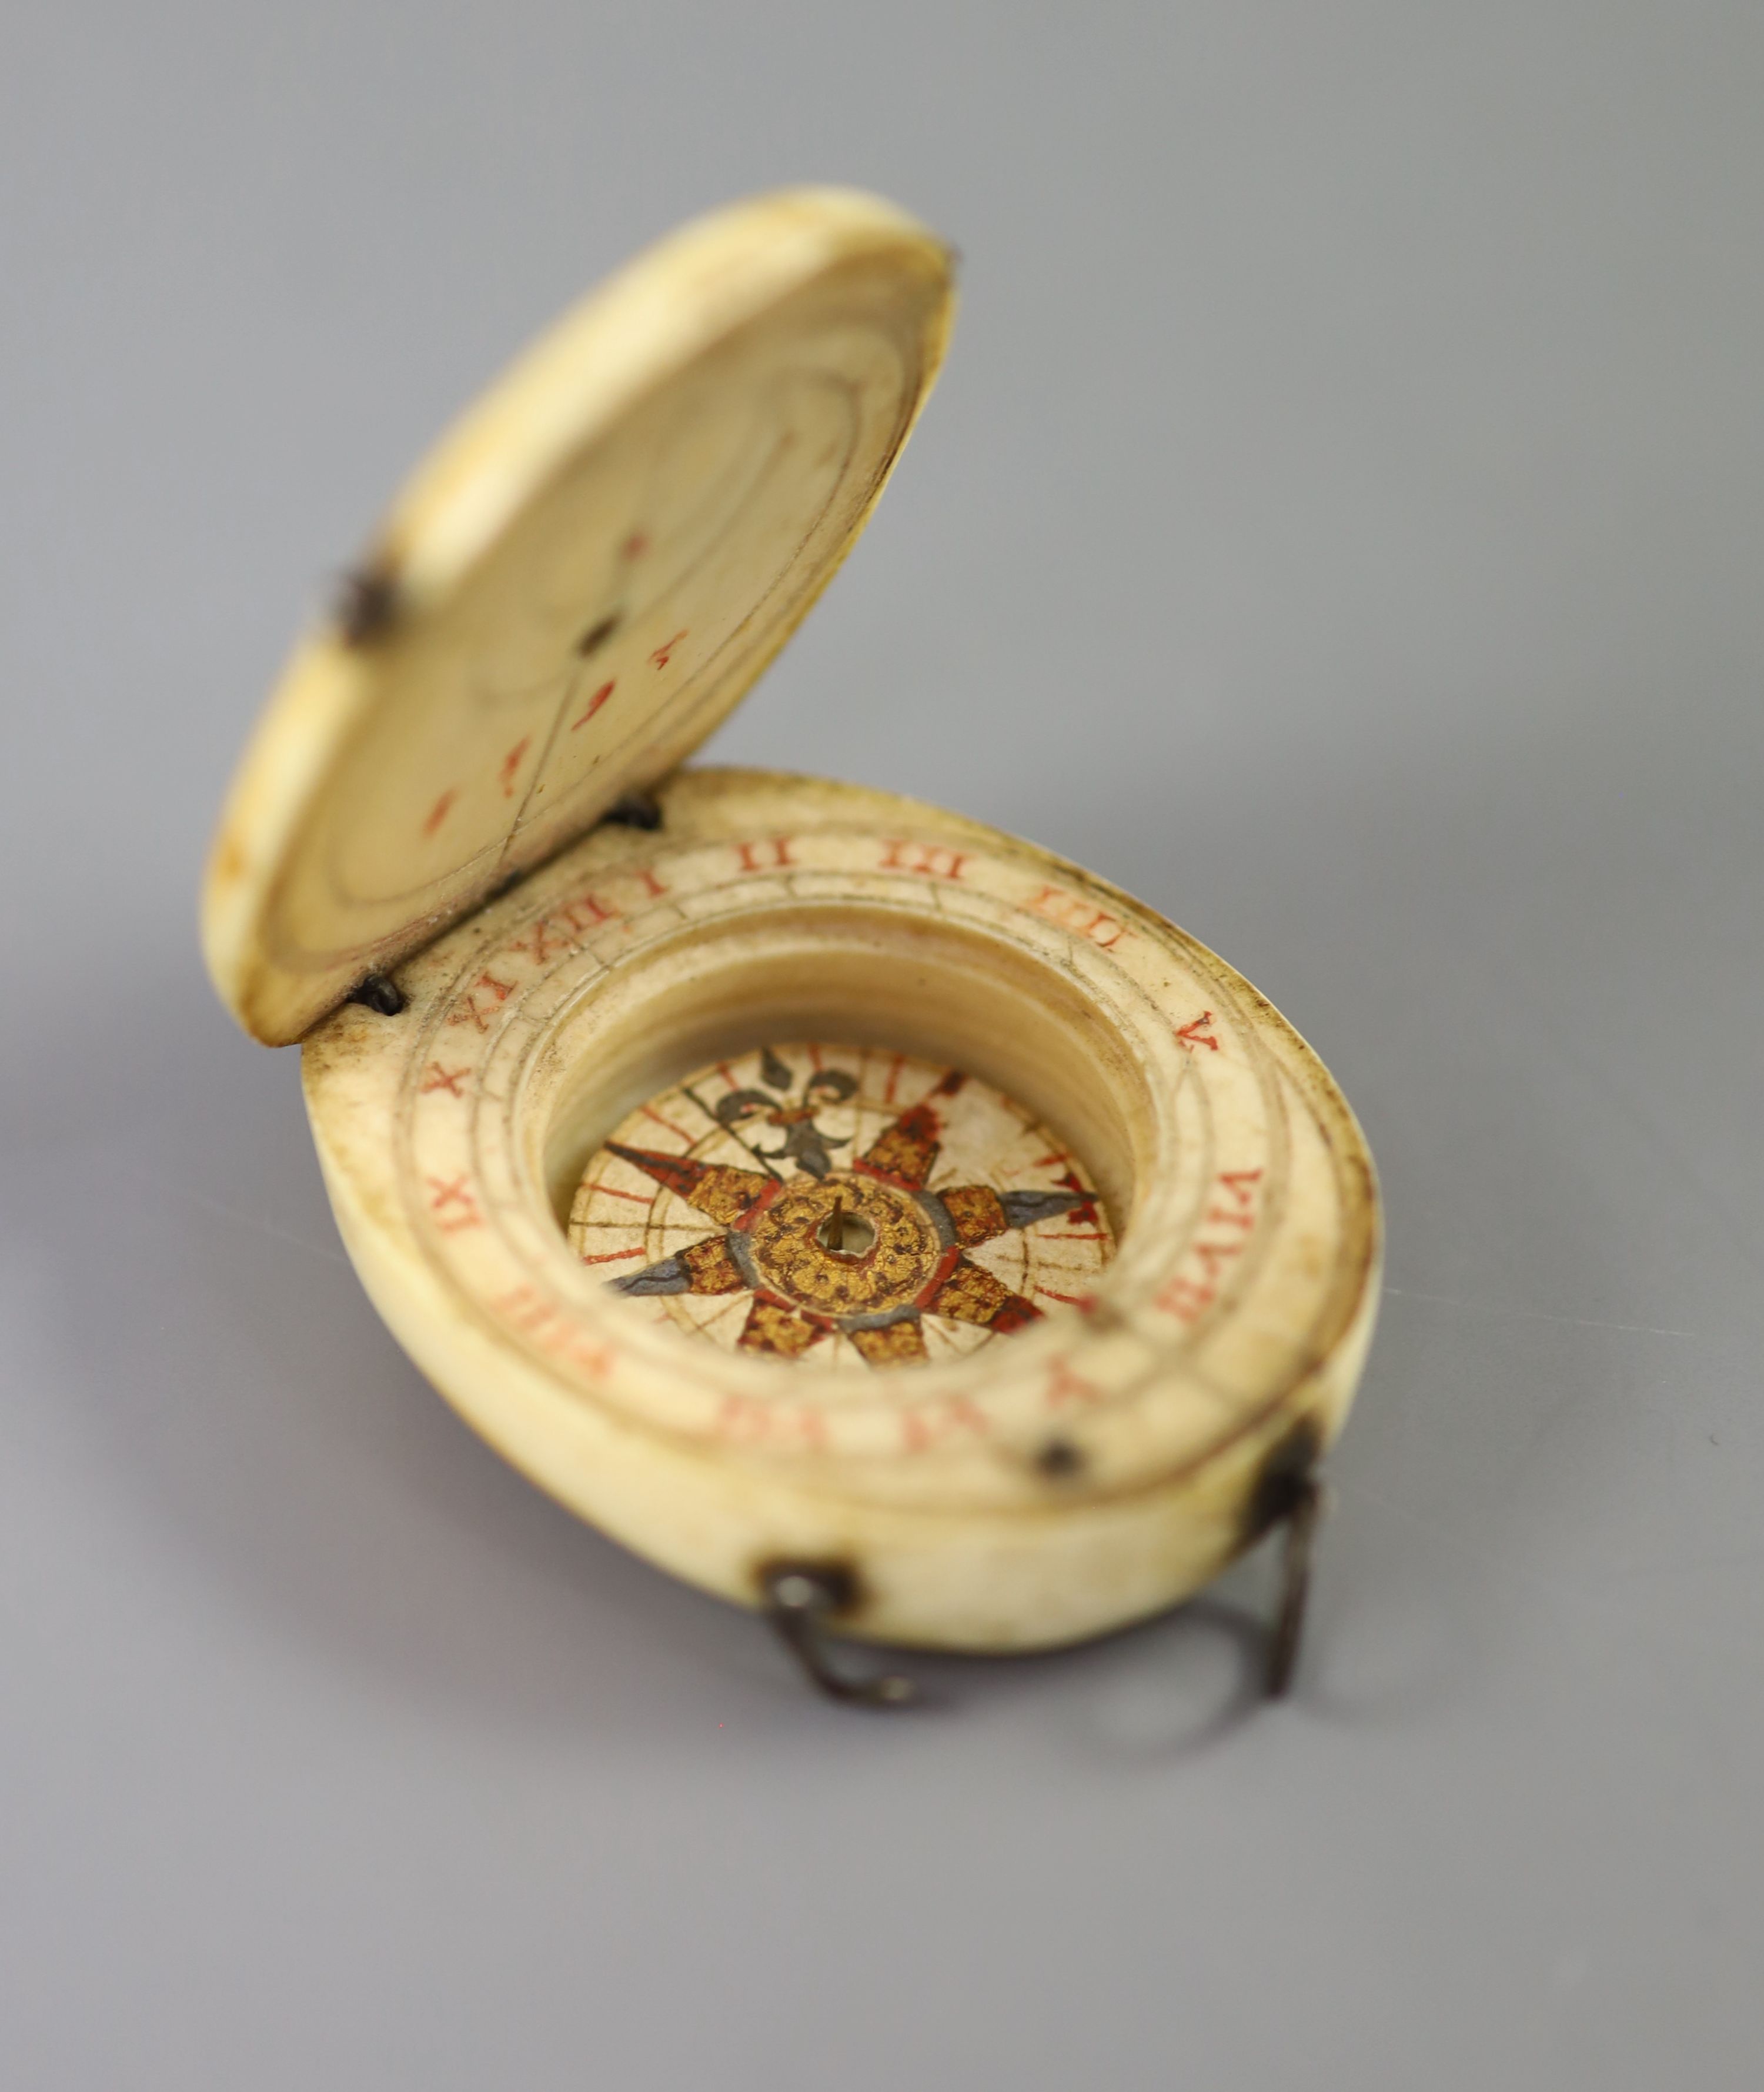 A rare late 16th century German oval ivory diptych-dial, width 39mm depth 48mm length 48mm